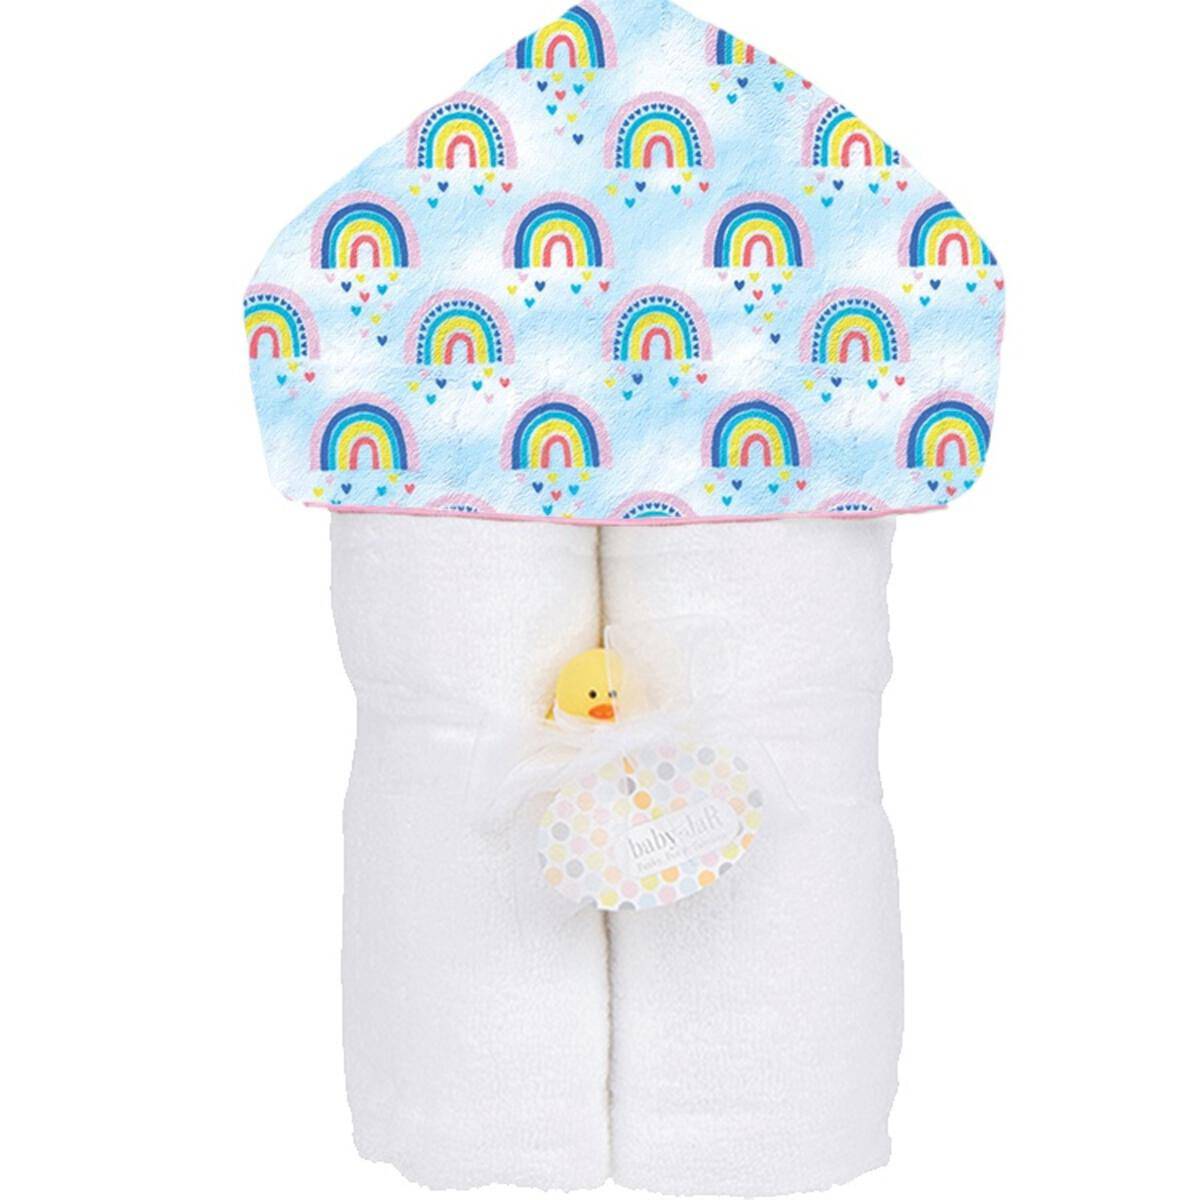 Over the Rainbow Deluxe Hooded Towel - Twinkle Twinkle Little One